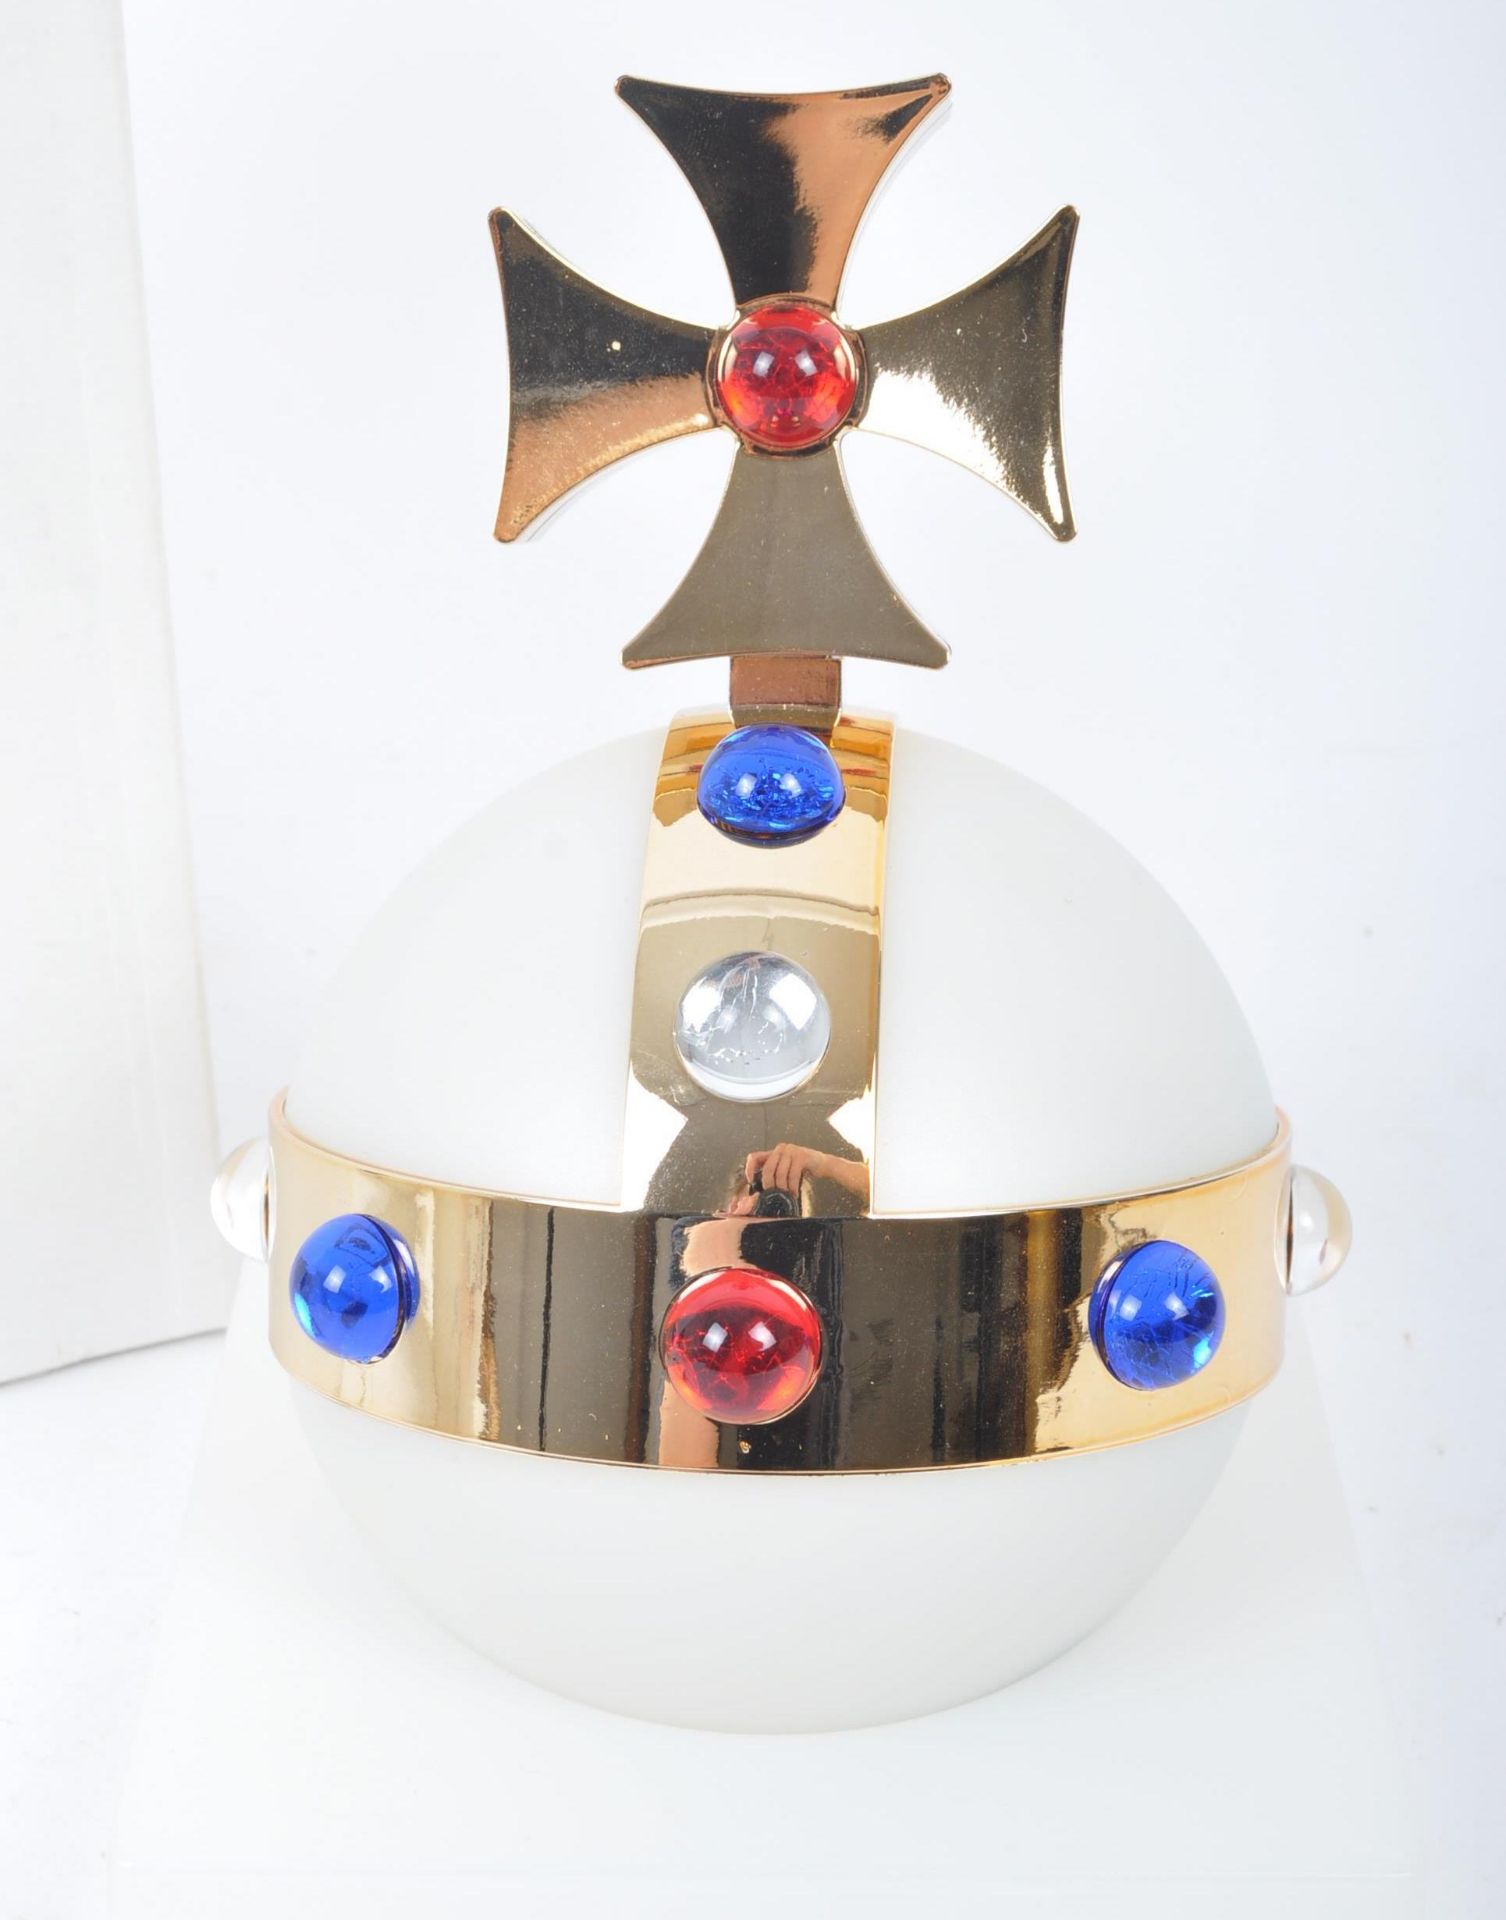 VIVIENNE WESTWOOD X POP SWATCH - ORB - LIMITED ED. 1993 WATCH - Image 3 of 6